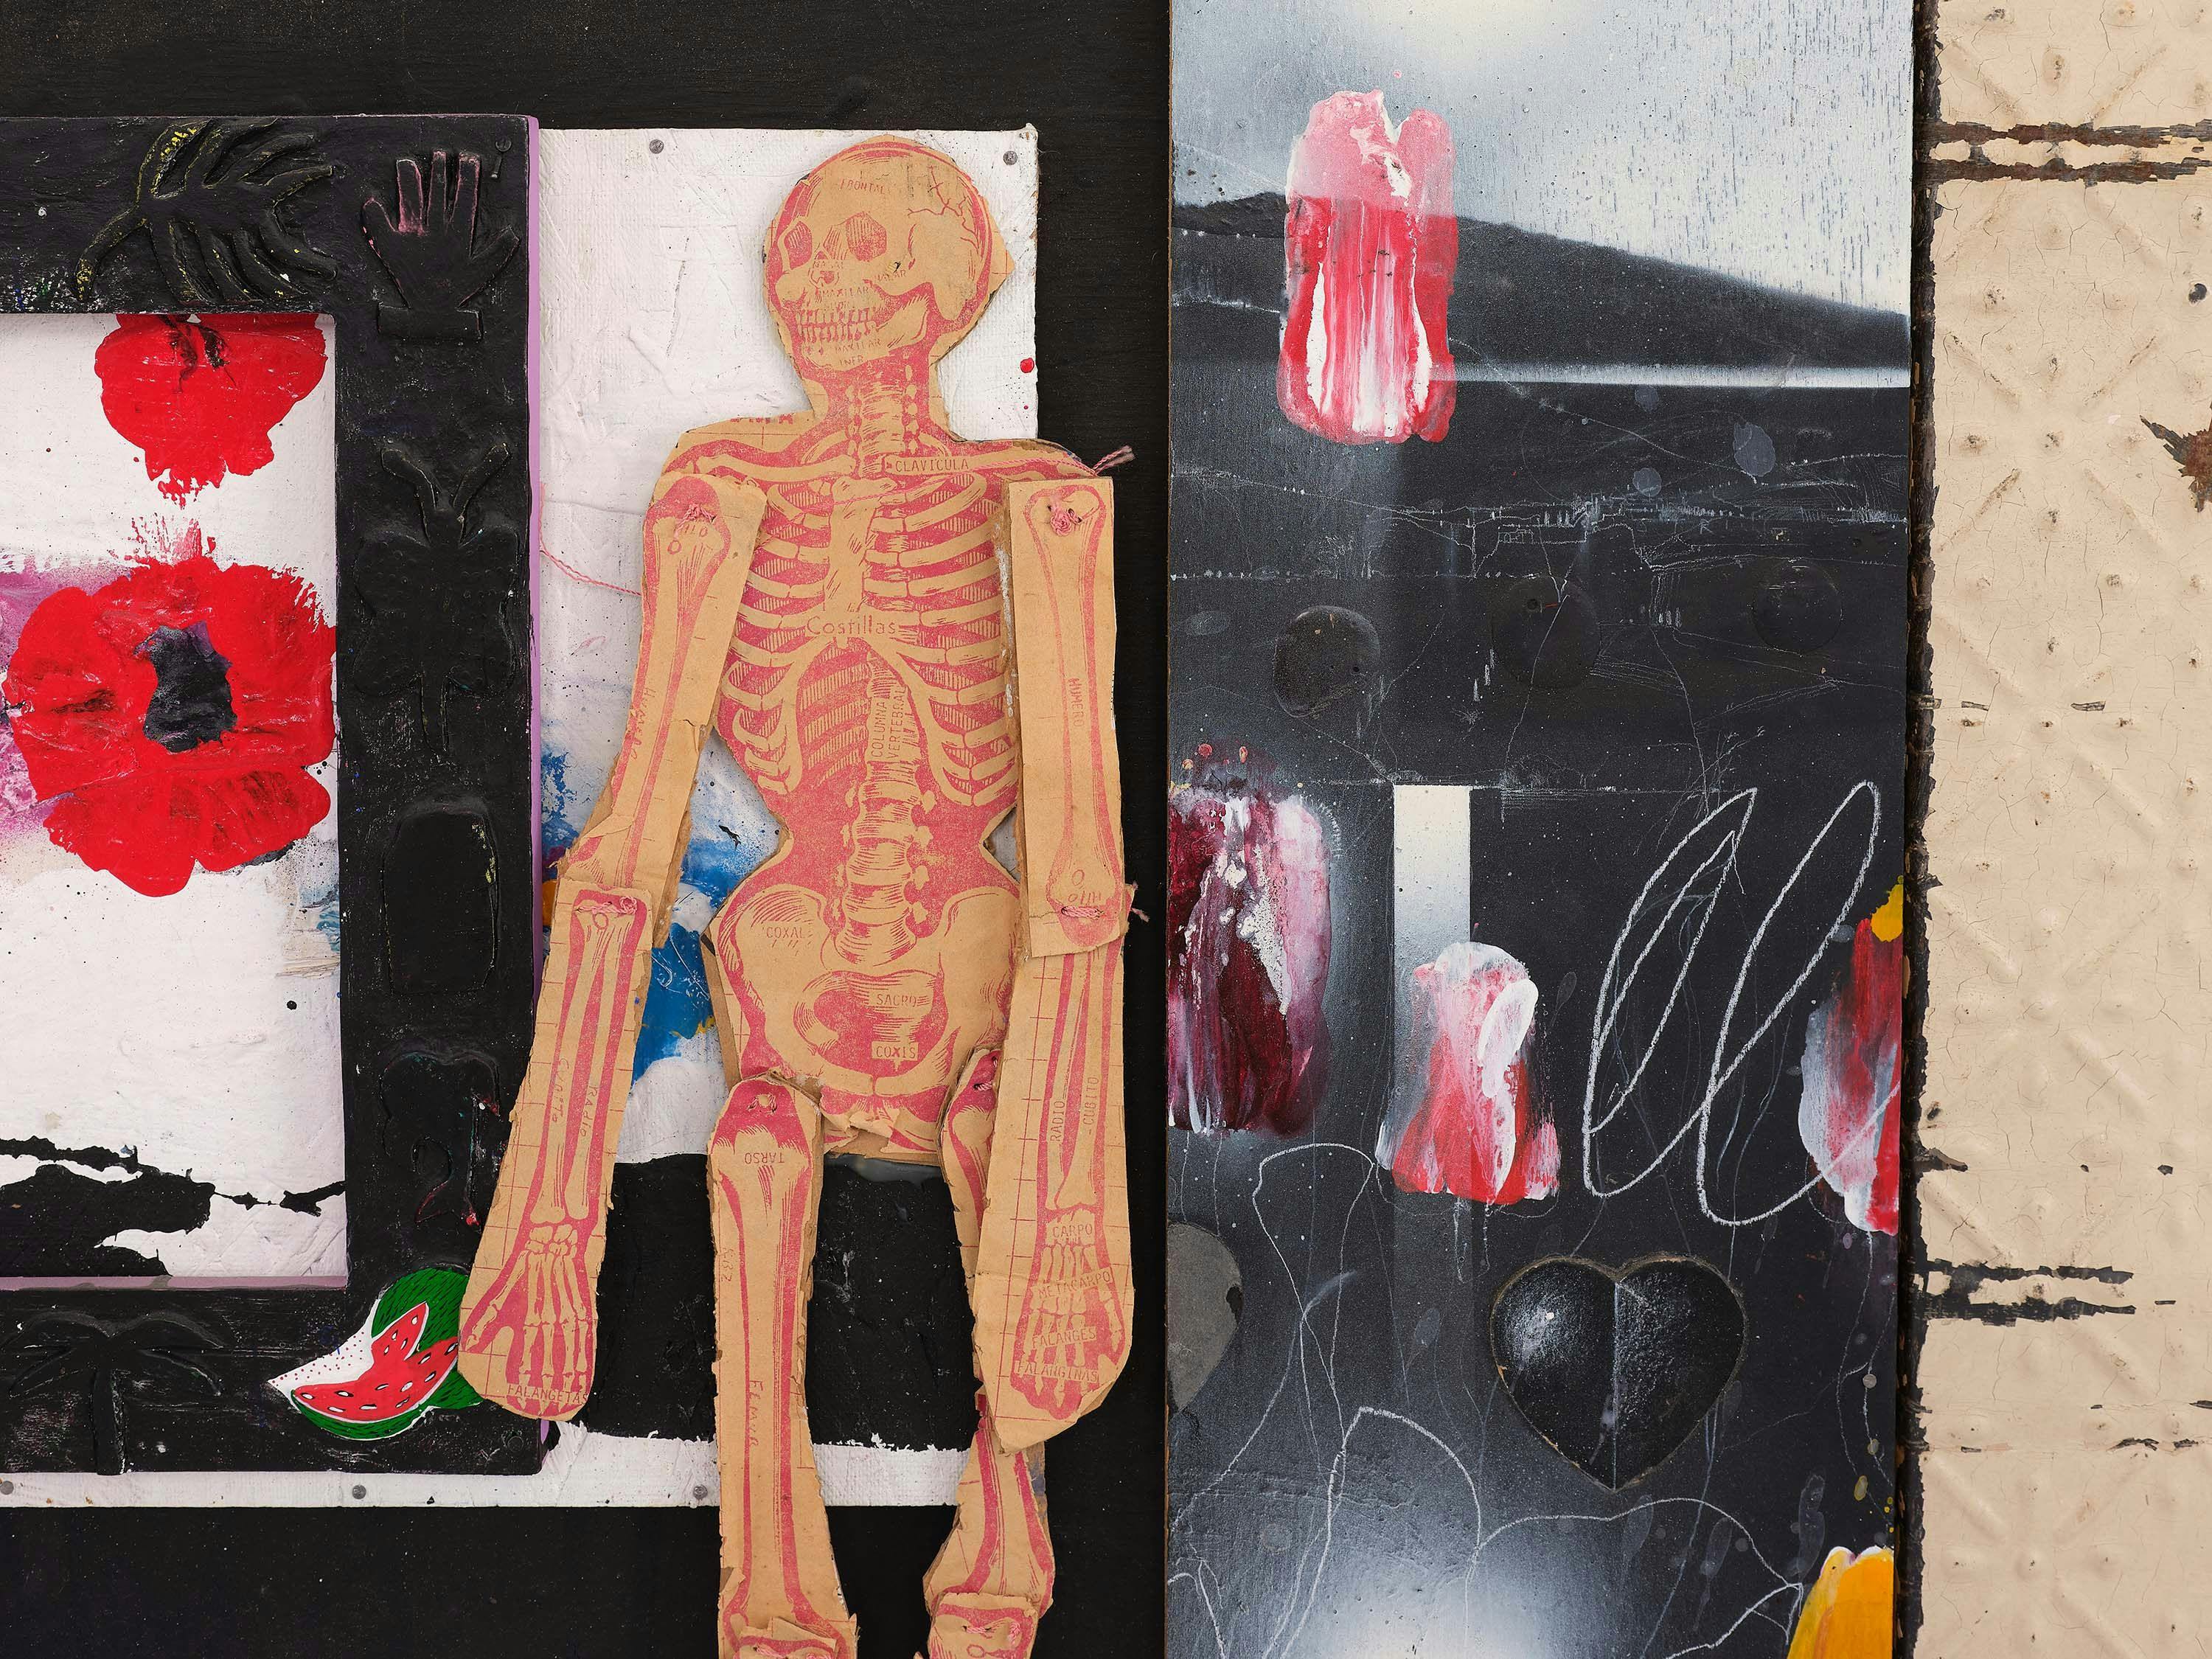 A detail from a mixed media artwork by Raymond Saunders, titled Beauty in Darkness, dated 1993 to 1999.